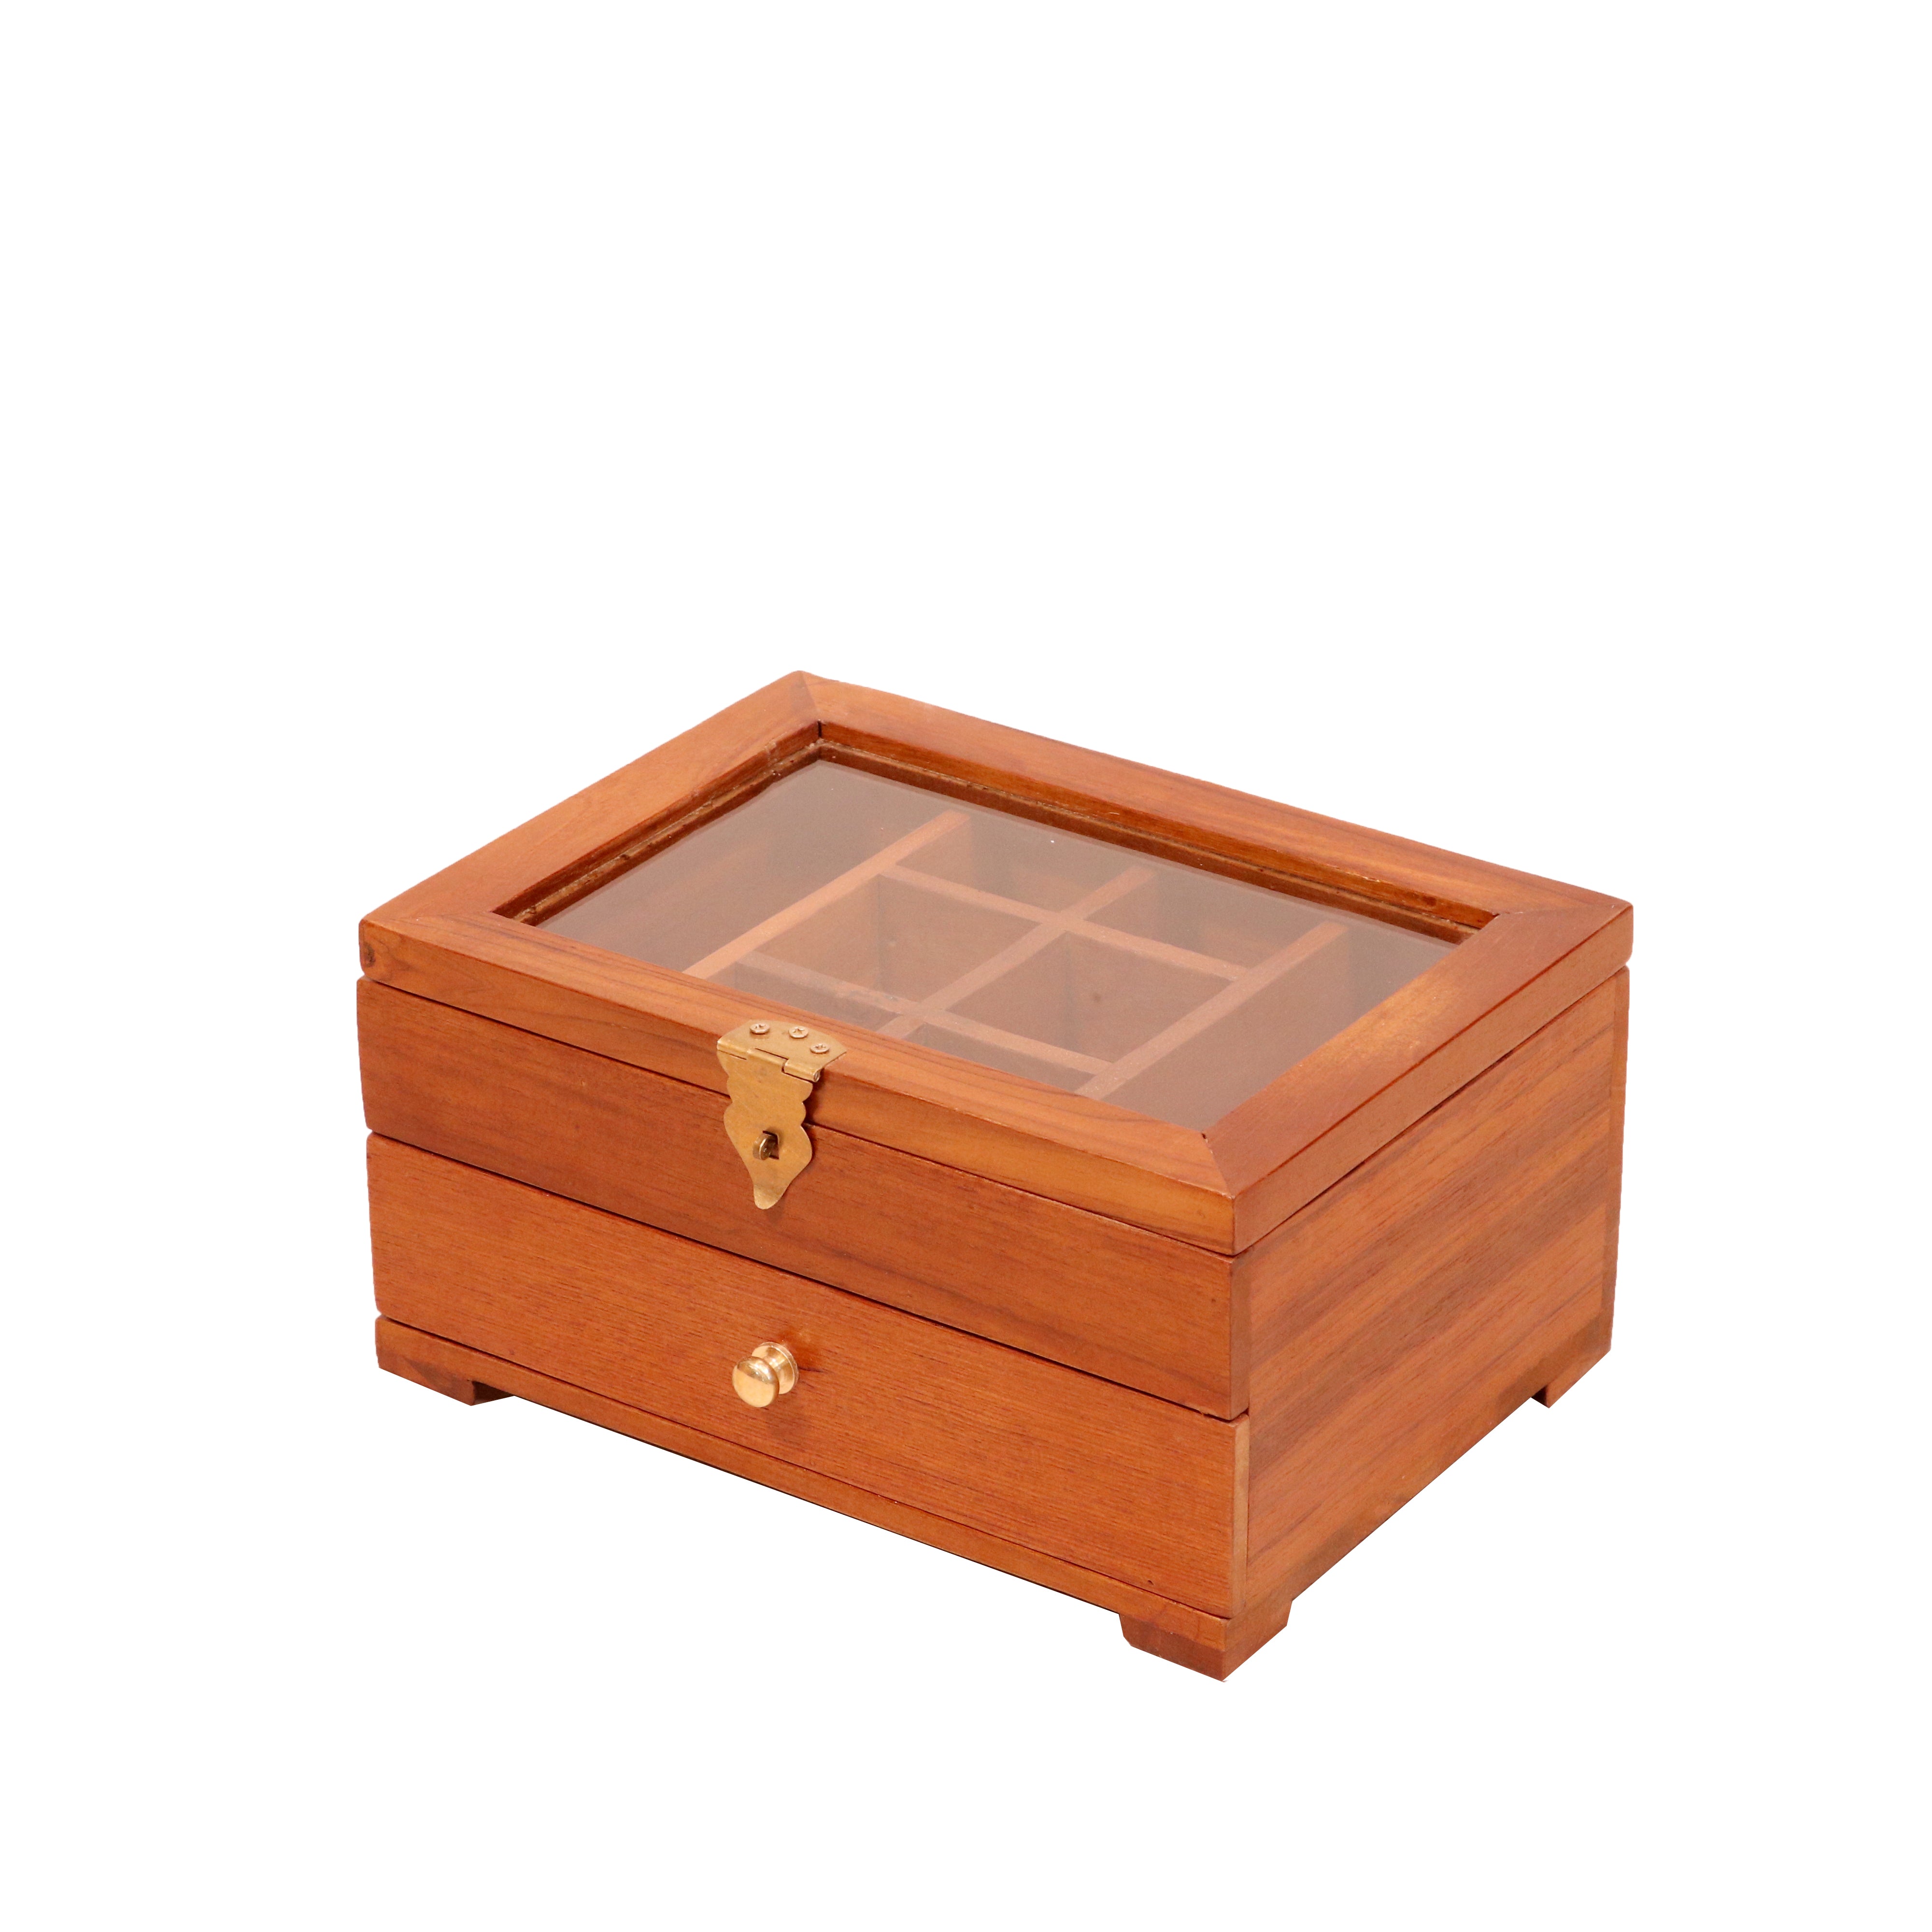 Marvelous Multi-Storage Simple Handmade Wooden Jewelry Box for Home Wooden Box